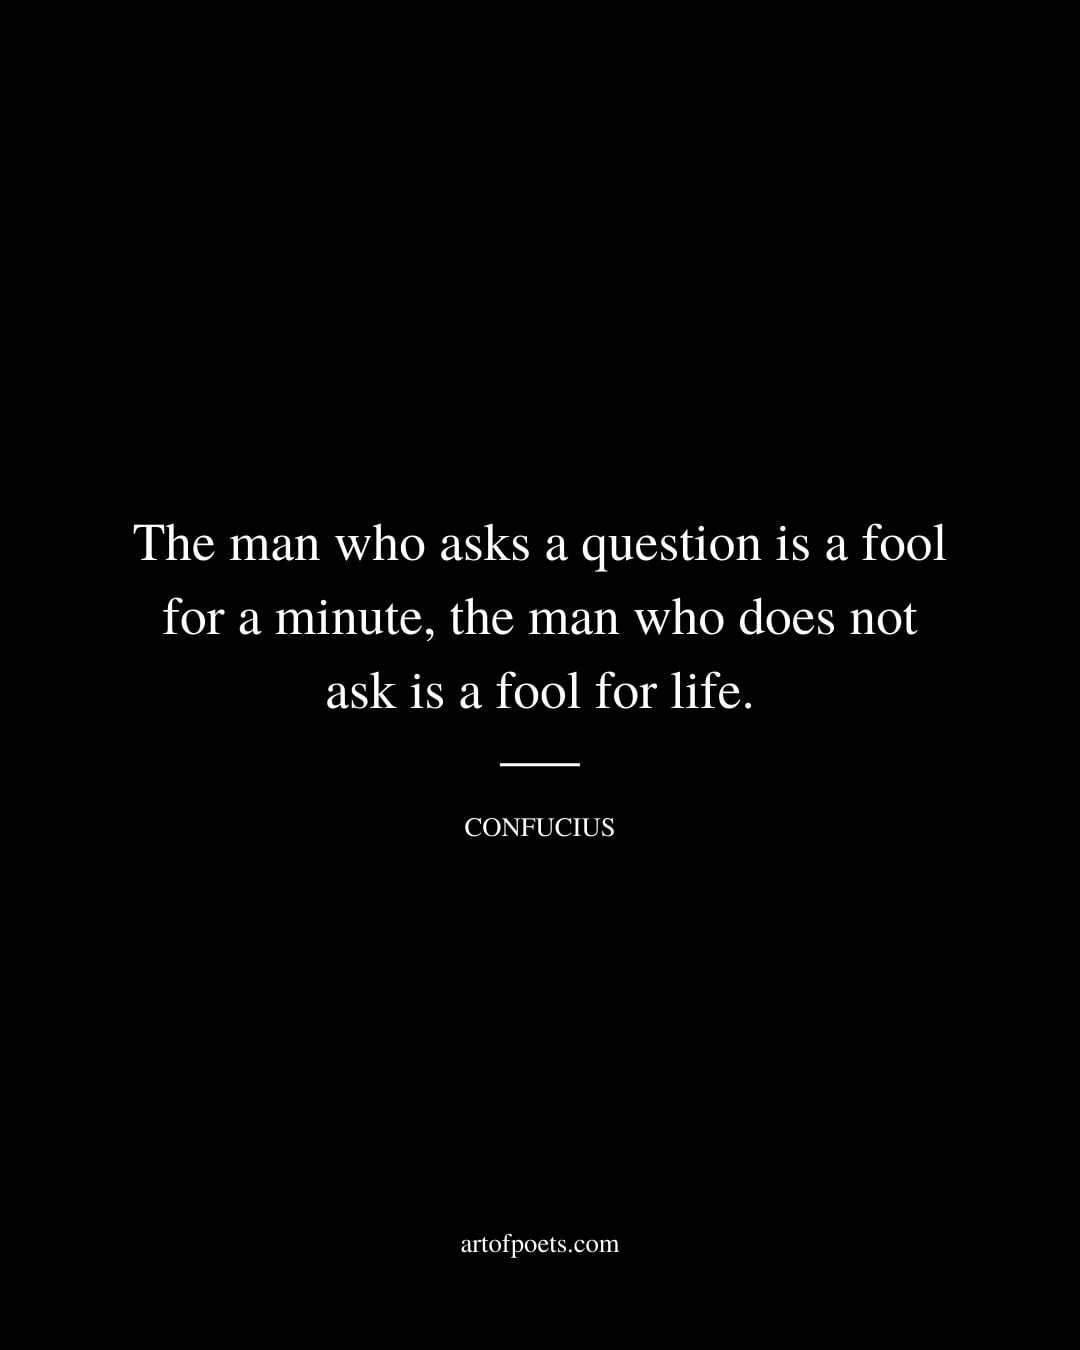 The man who asks a question is a fool for a minute the man who does not ask is a fool for life